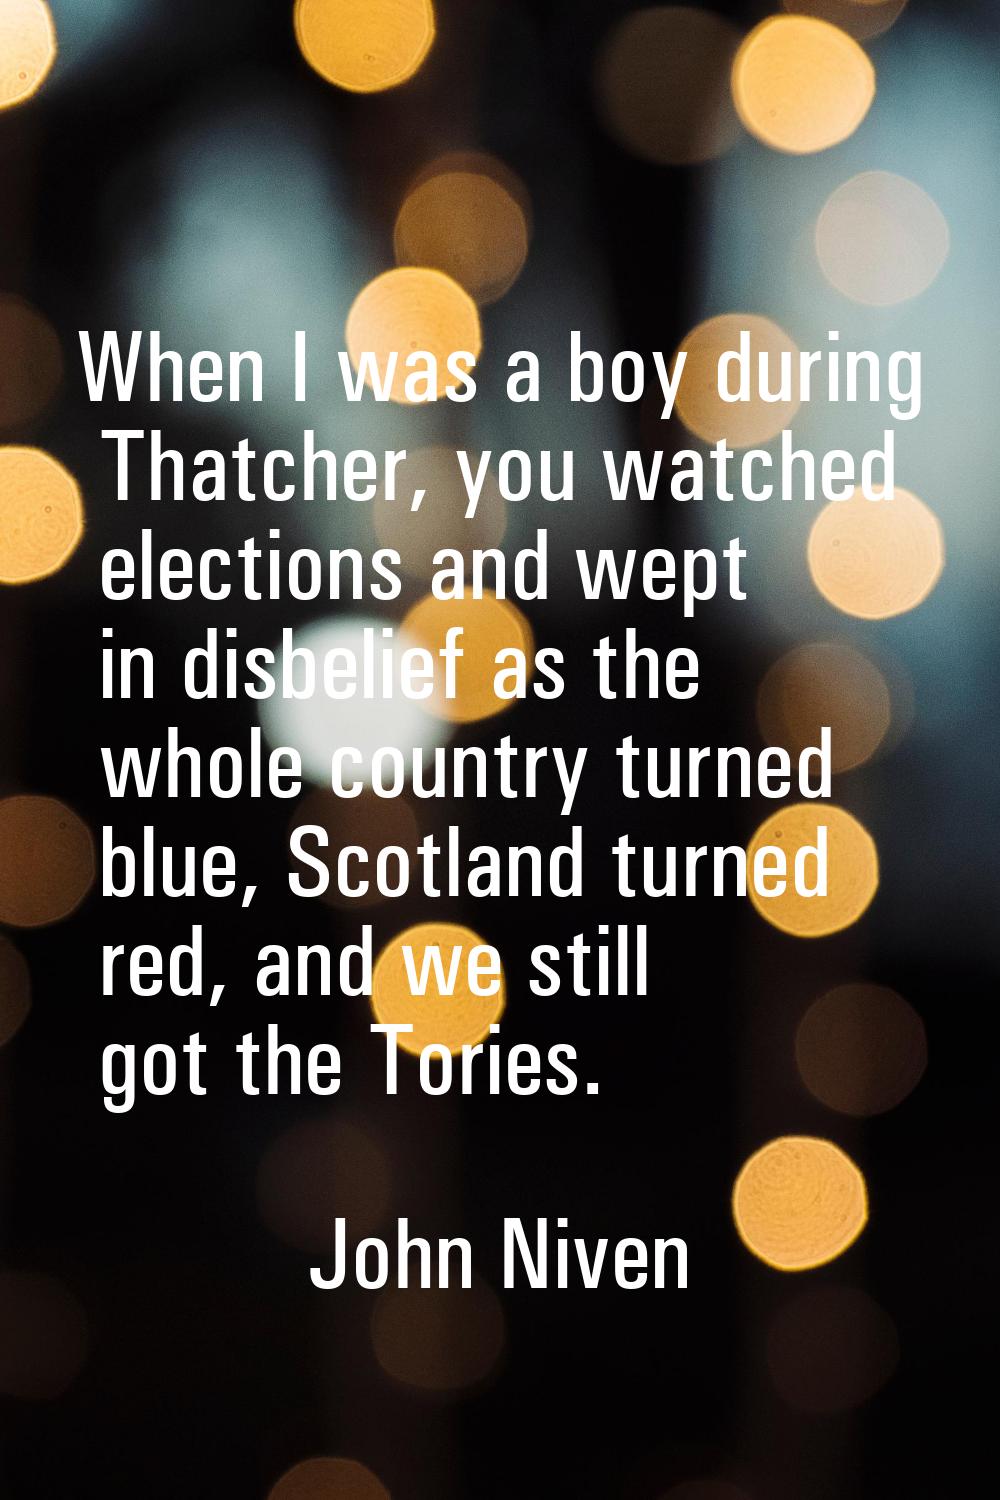 When I was a boy during Thatcher, you watched elections and wept in disbelief as the whole country 